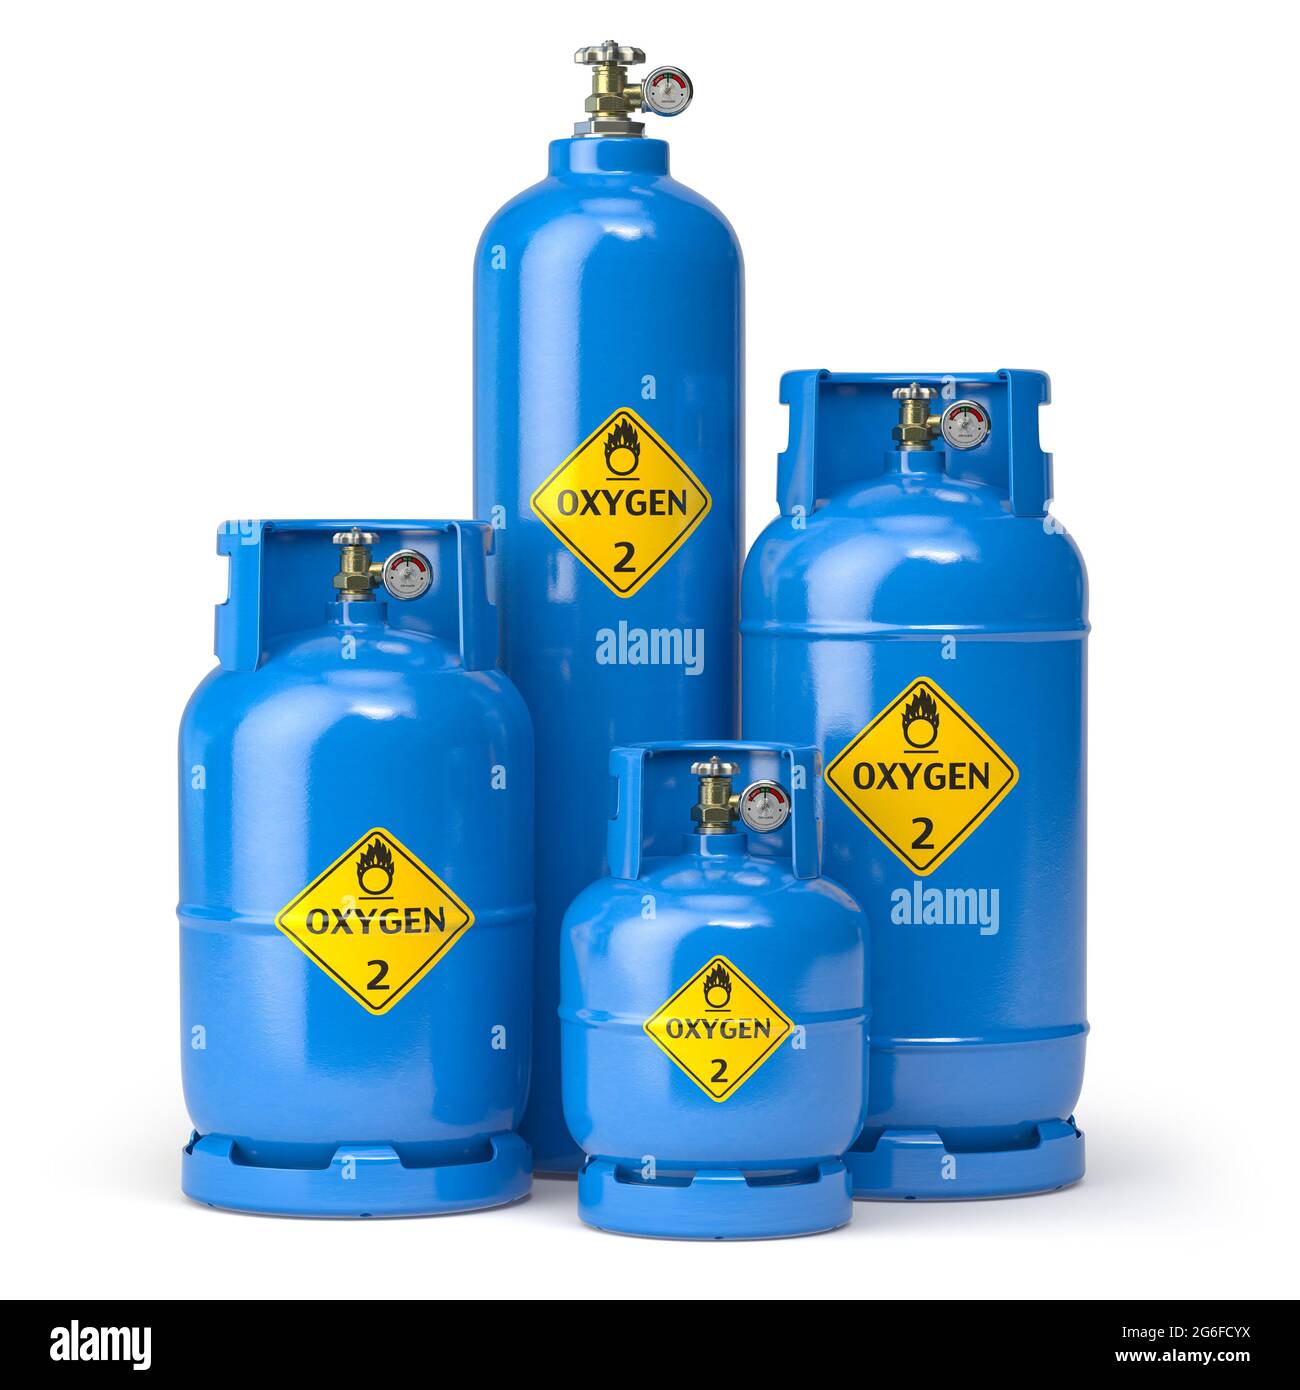 Oxygen gas tanks containers and cilinders of different size isolated on white. 3d illustration. Stock Photo